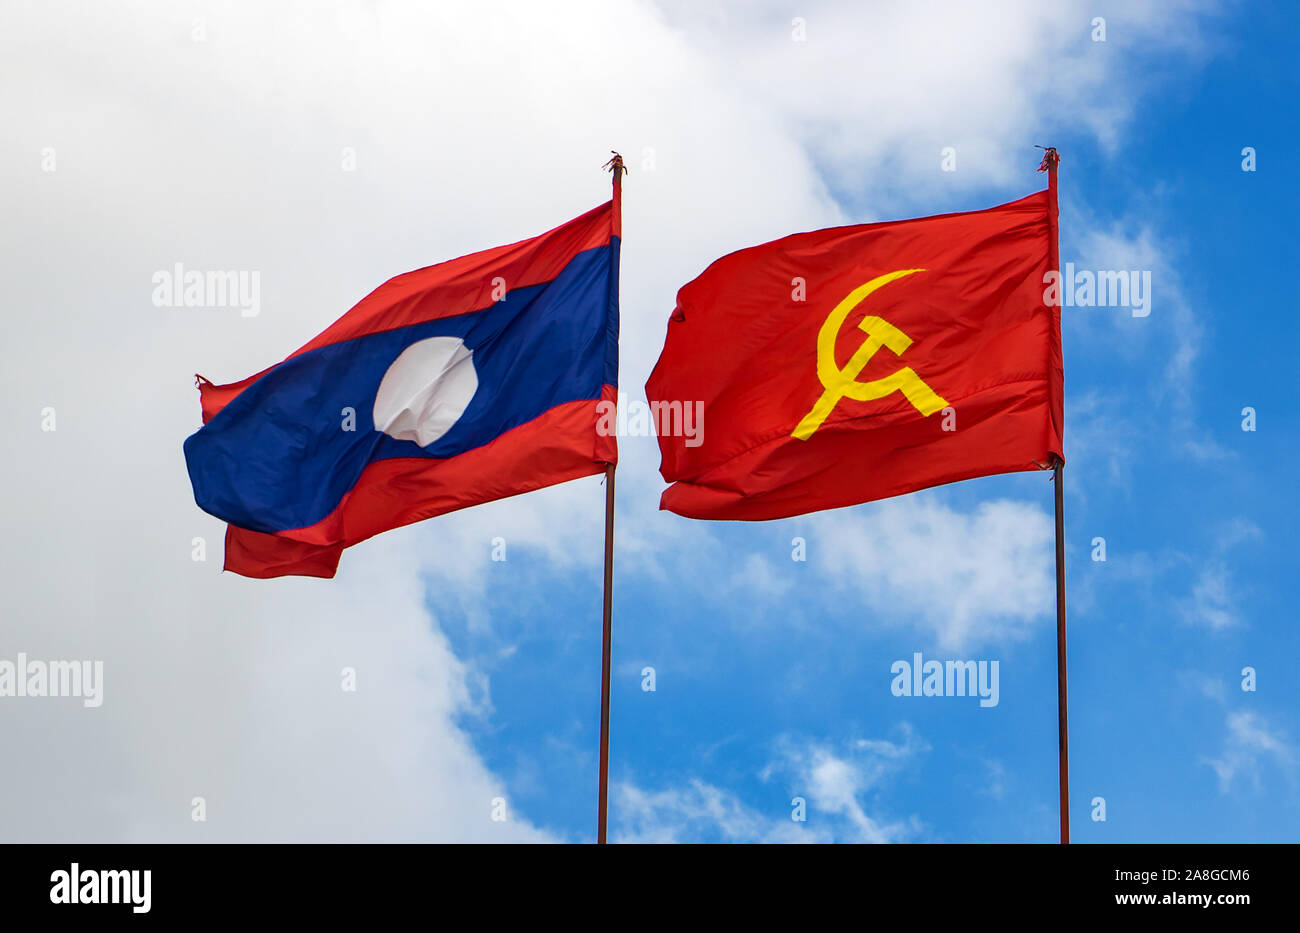 Communist Symbols High Resolution Stock Photography and Images - Alamy